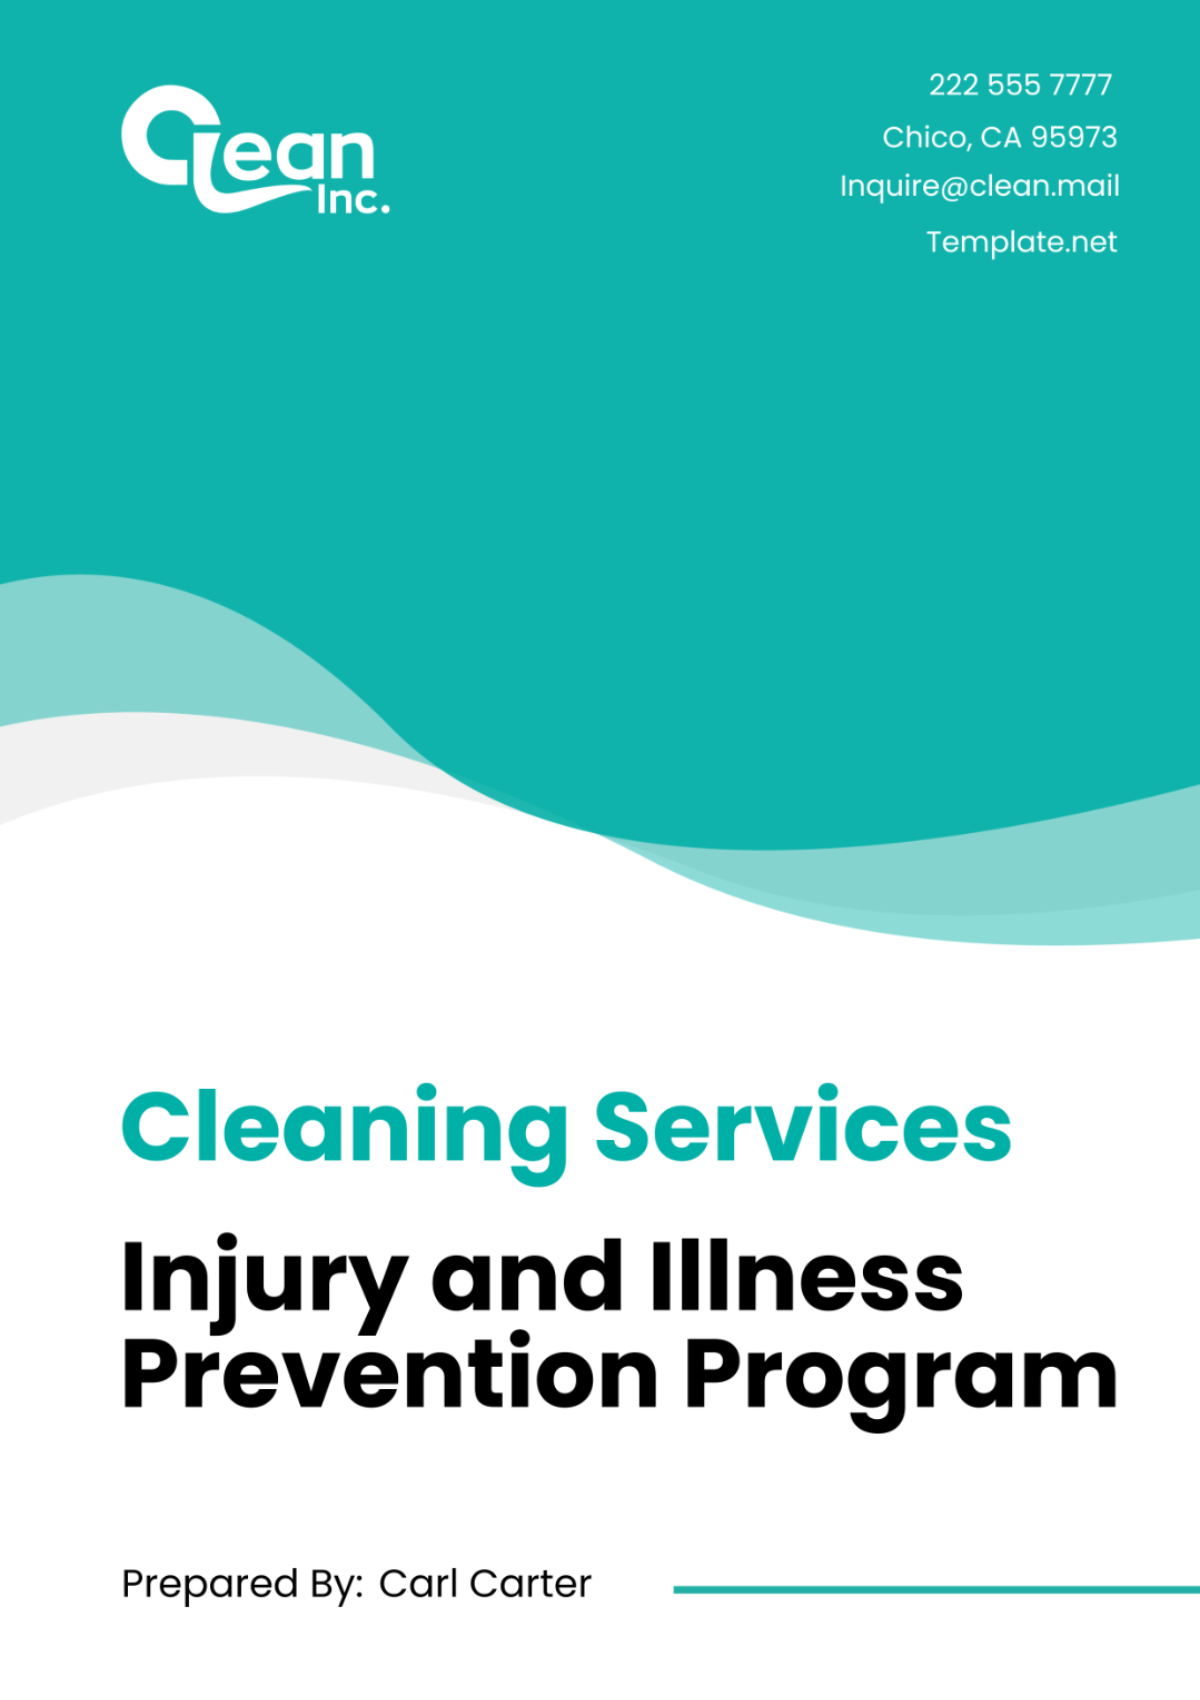 Cleaning Services Injury and Illness Prevention Program Template